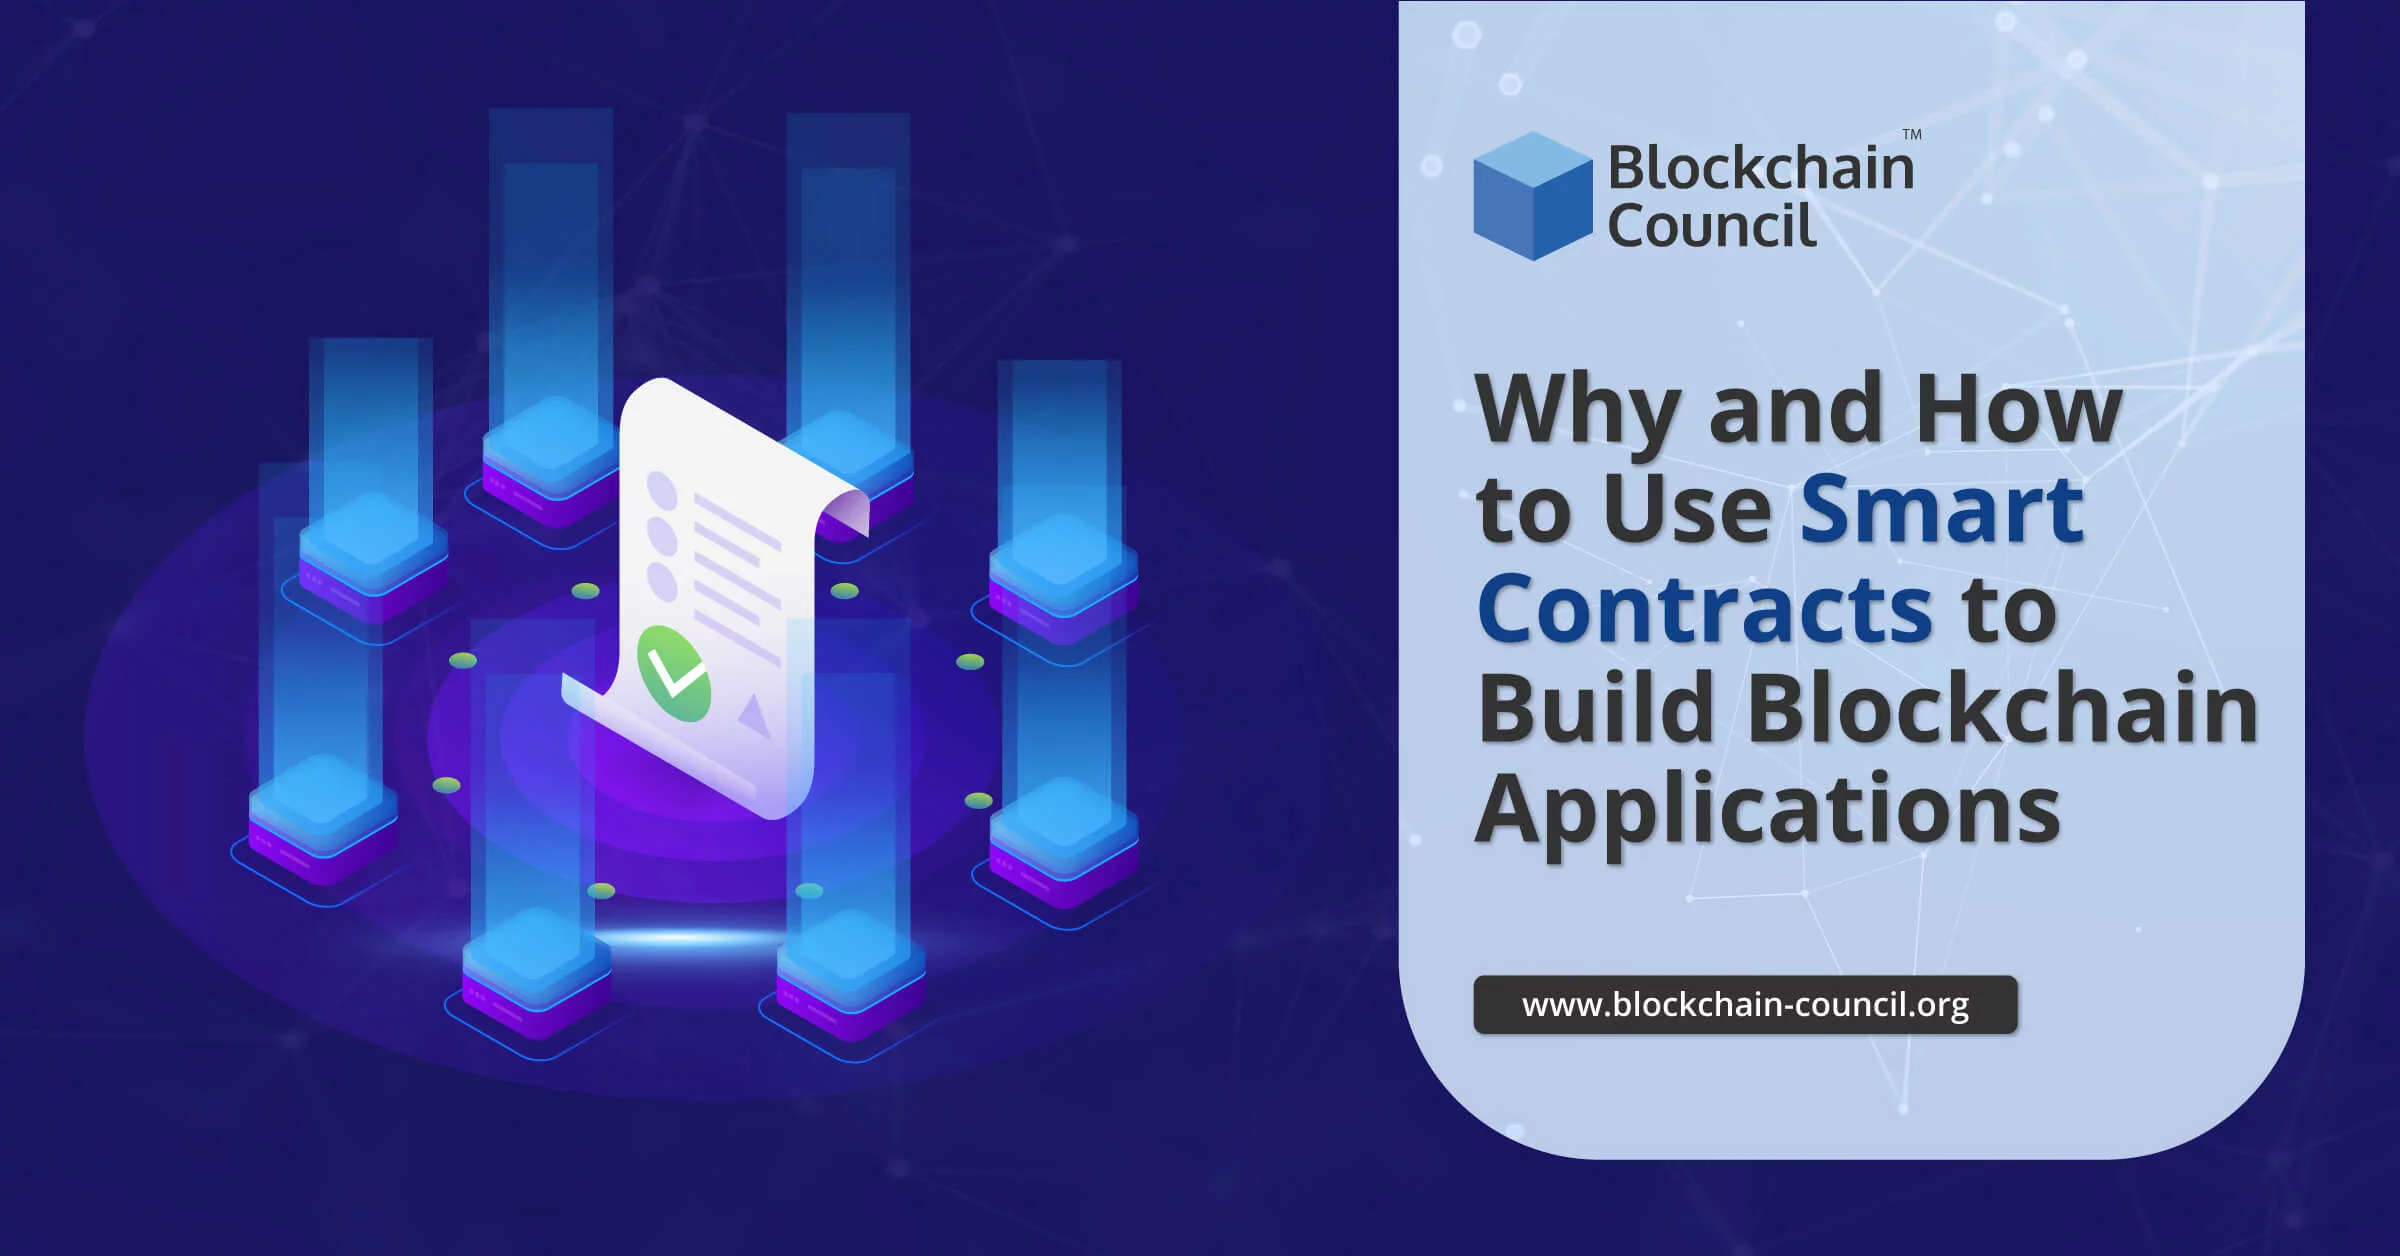 Why and How to Use Smart Contracts to Build Blockchain Applications